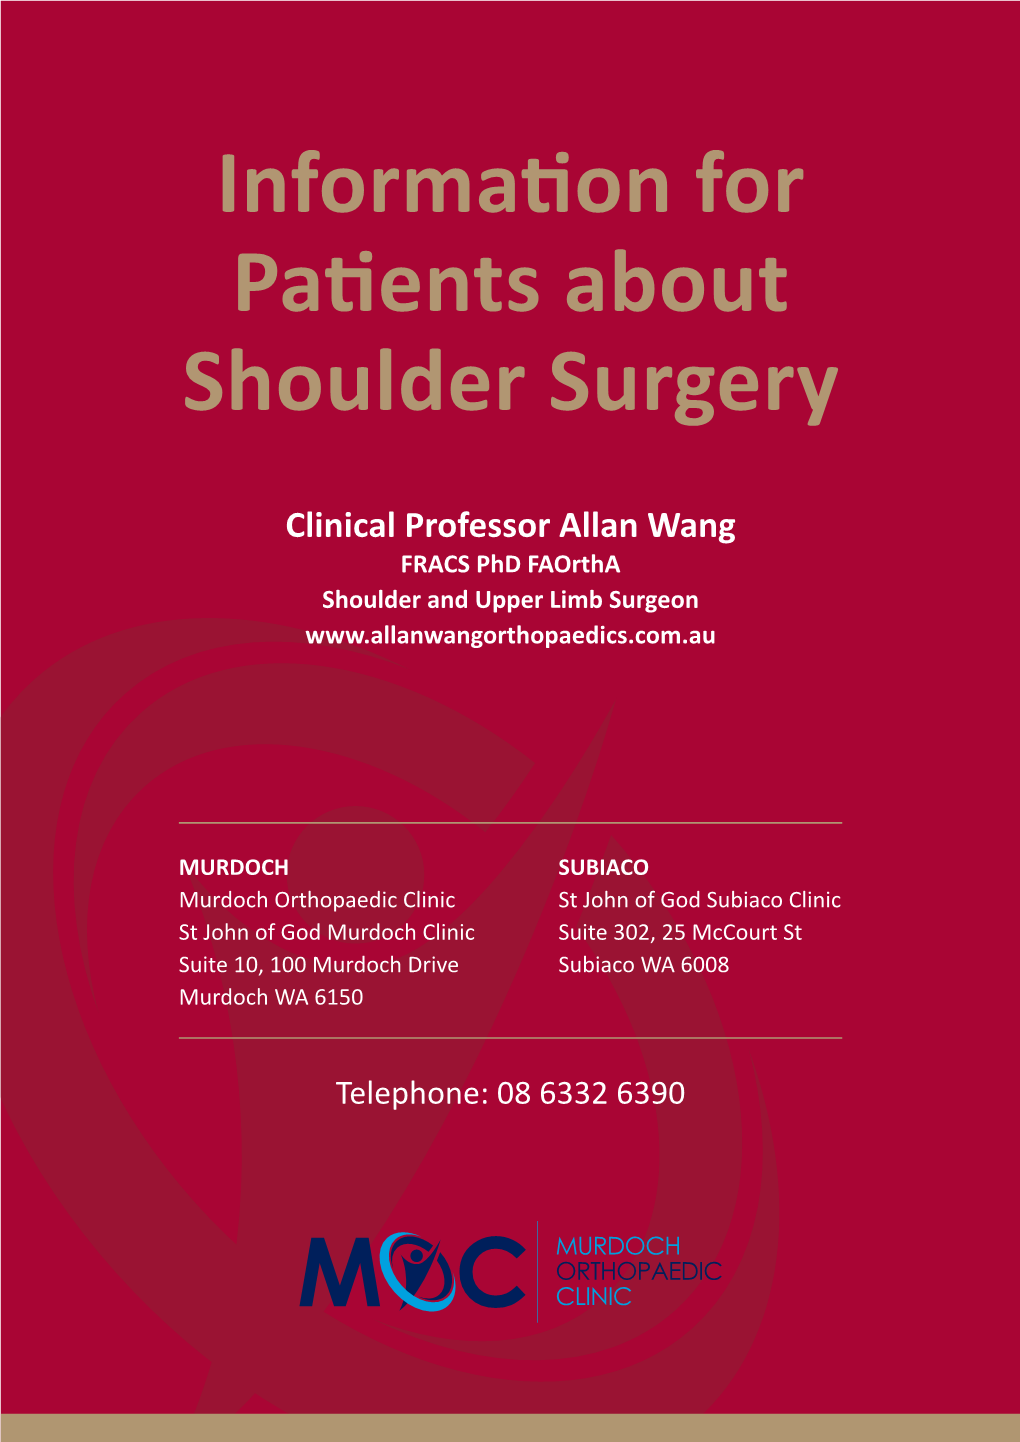 Information for Patients About Shoulder Surgery